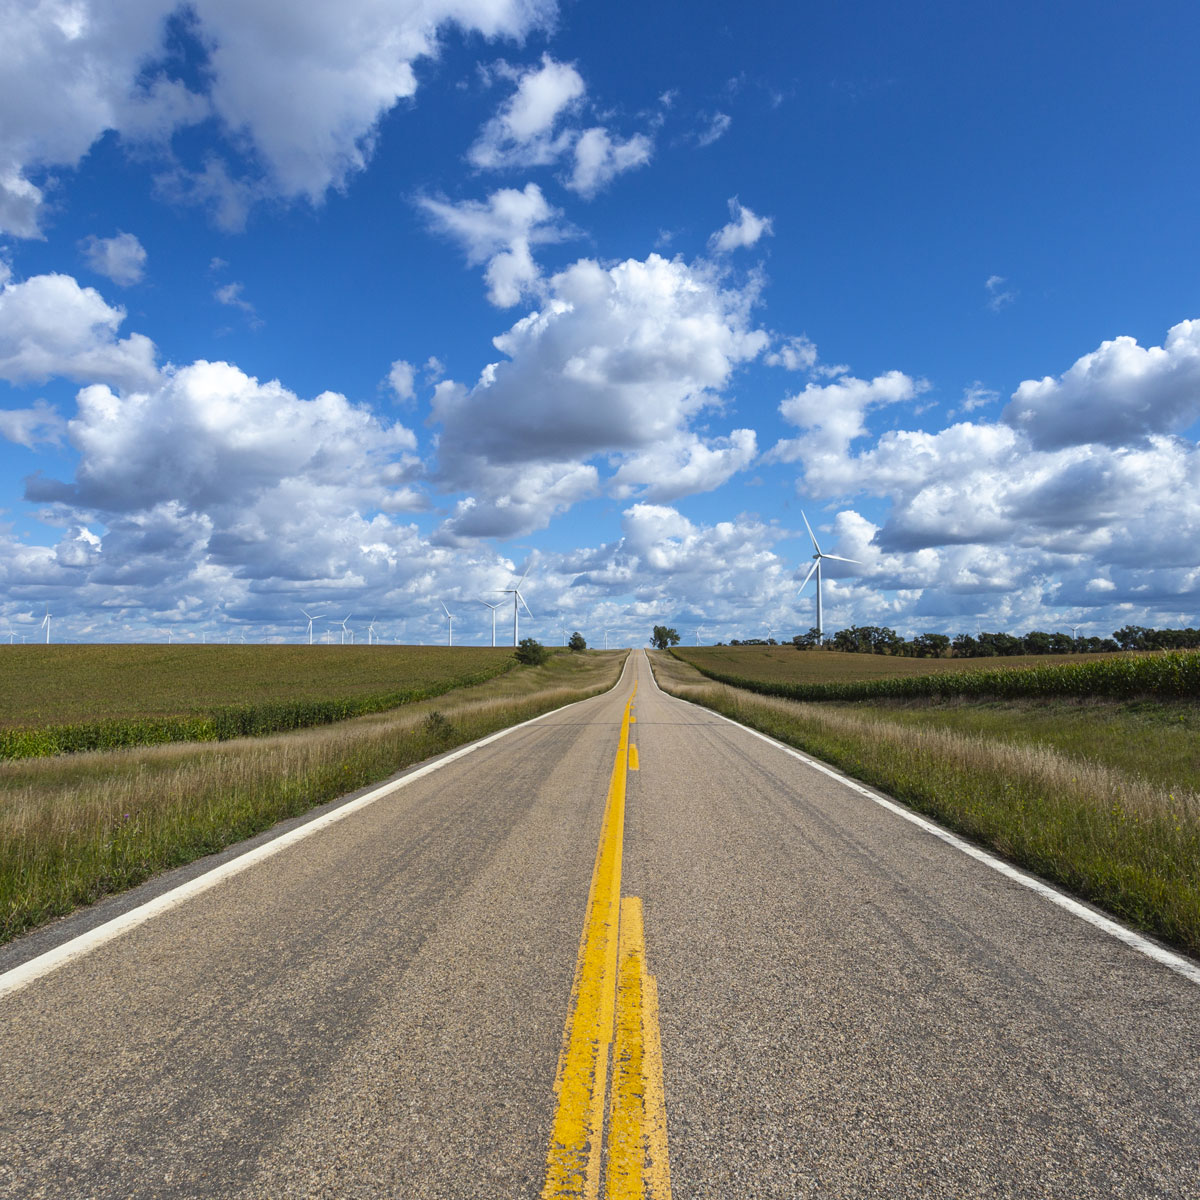 The yellow centerline of a highway leads into the distance between cornfields beneath blue sky and puffy white clouds. Wind turbines tower on either side on the horizon.